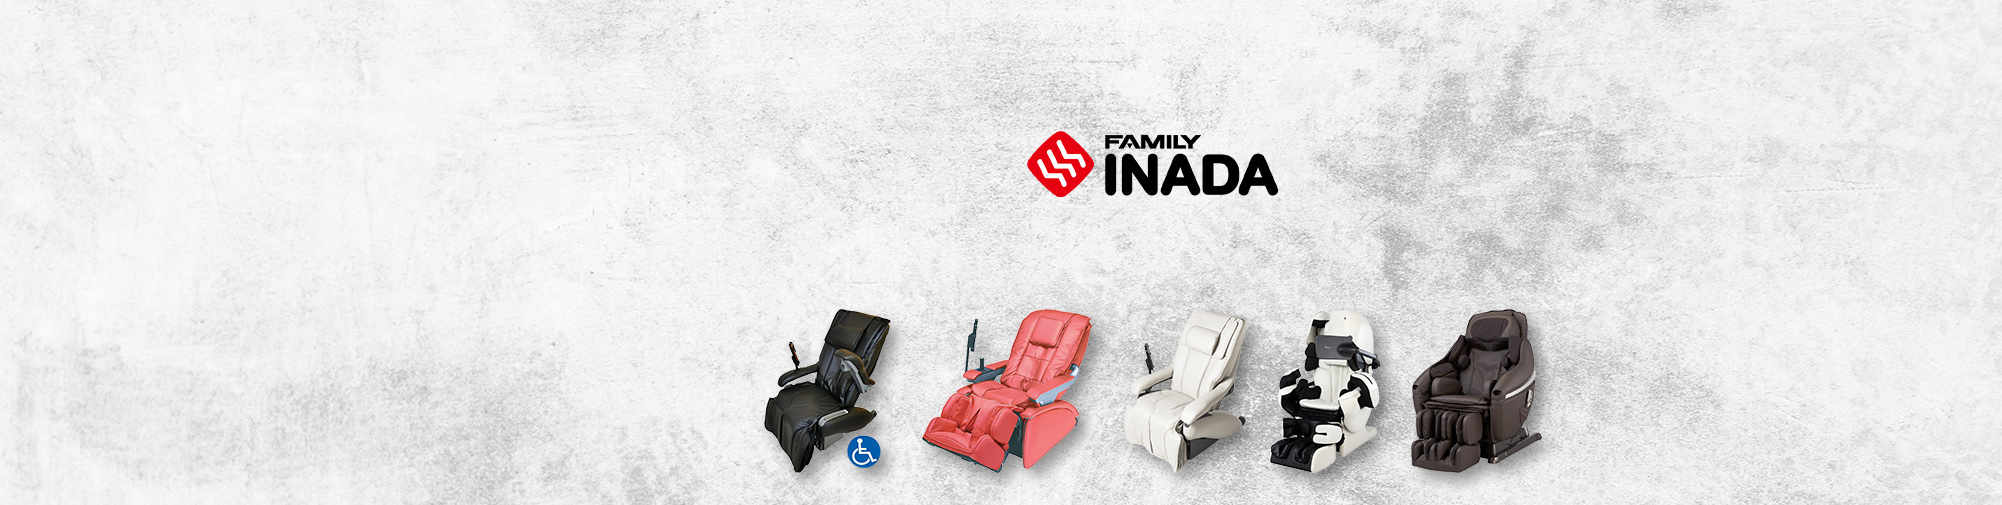 Family Inada - traditional Japanese company | Massage Chair World